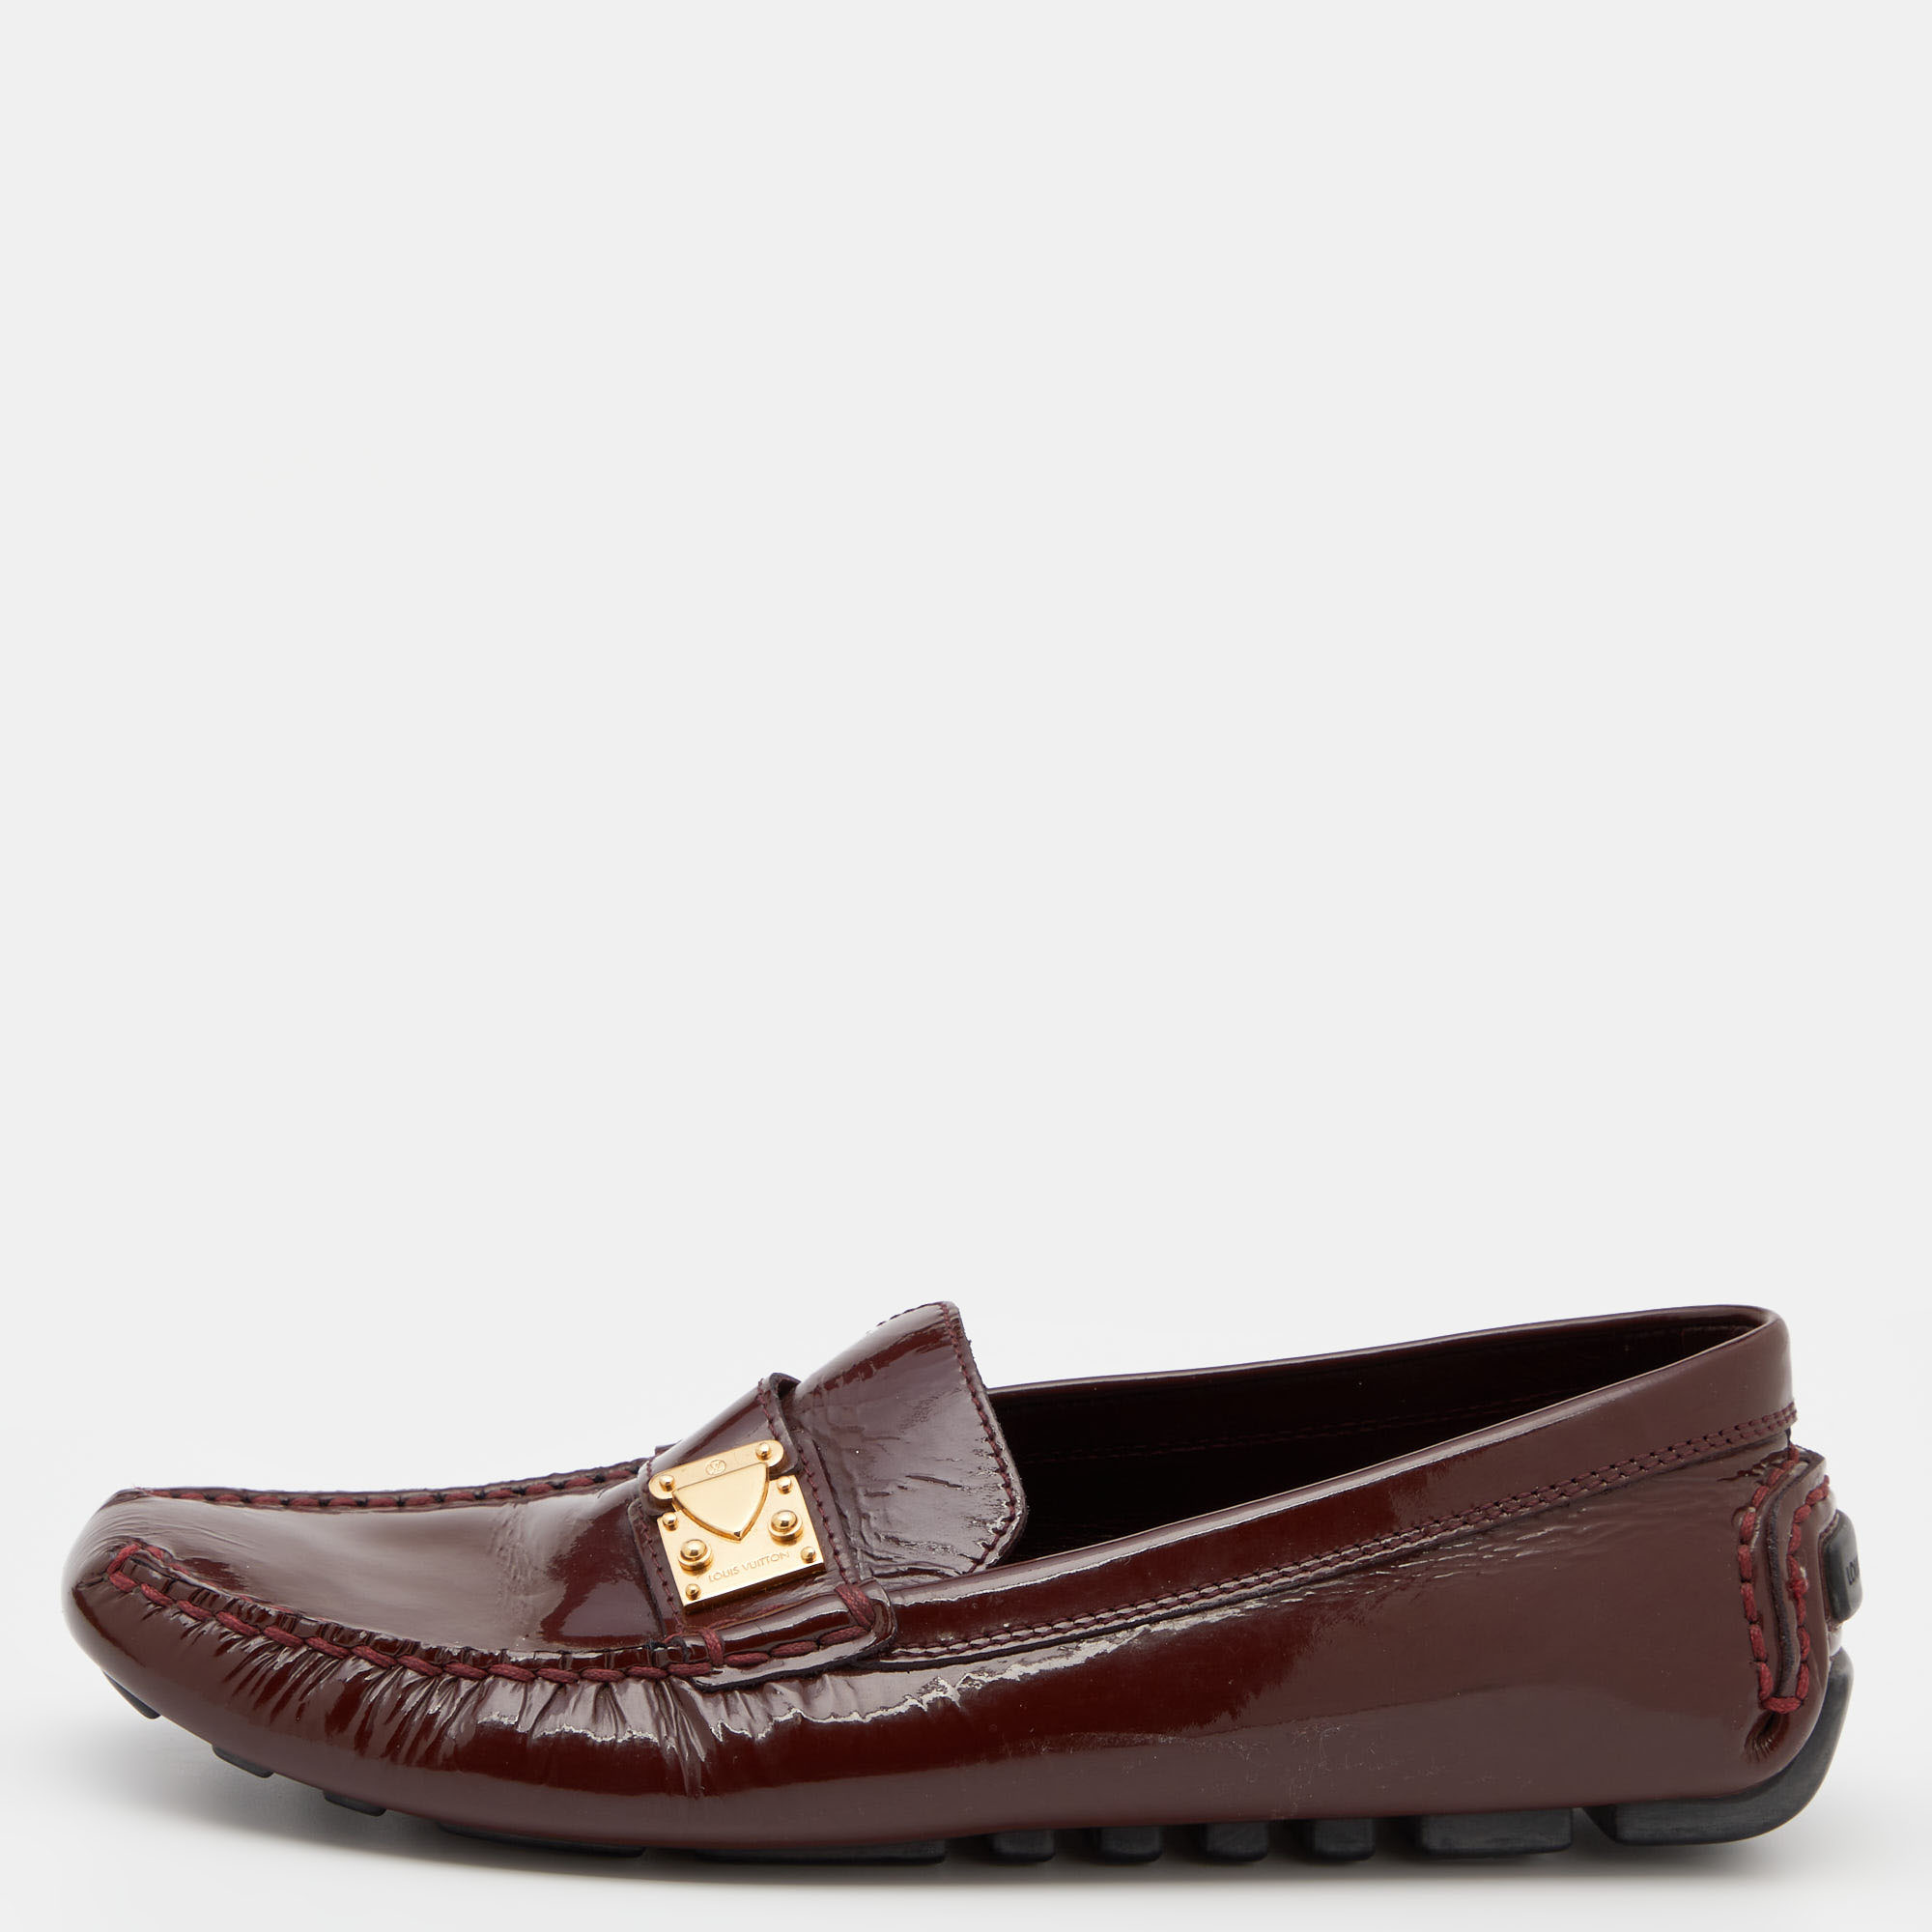 

Louis Vuitton Burgundy Patent Leather Slip On Loafers Size